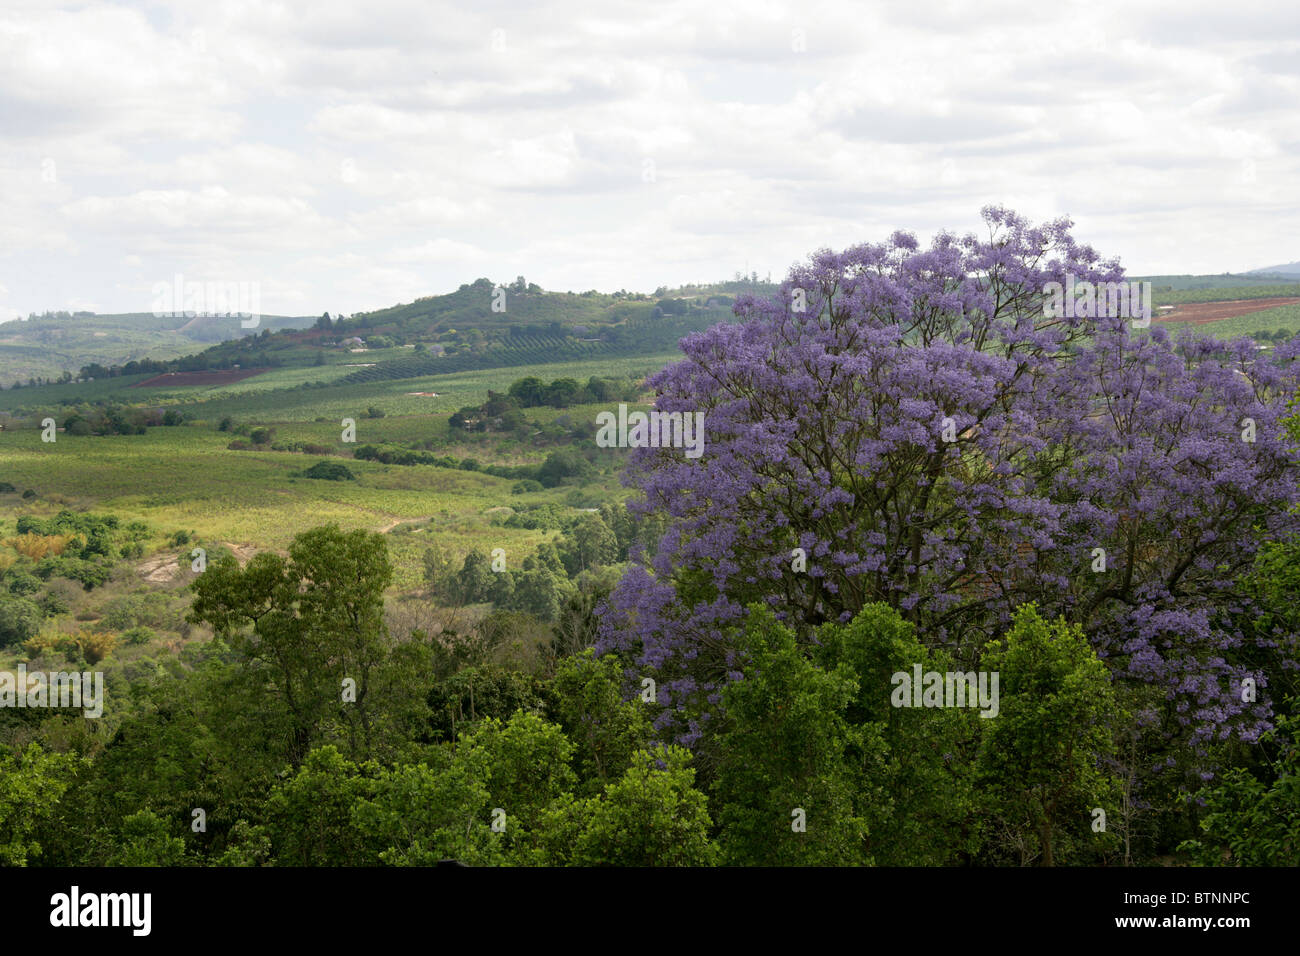 The View from Hazyview Hotel, Hazyview, Near Kruger National Park, Mpumalanga, South Africa. Eastern Transvaal. Large Jacaranda Stock Photo